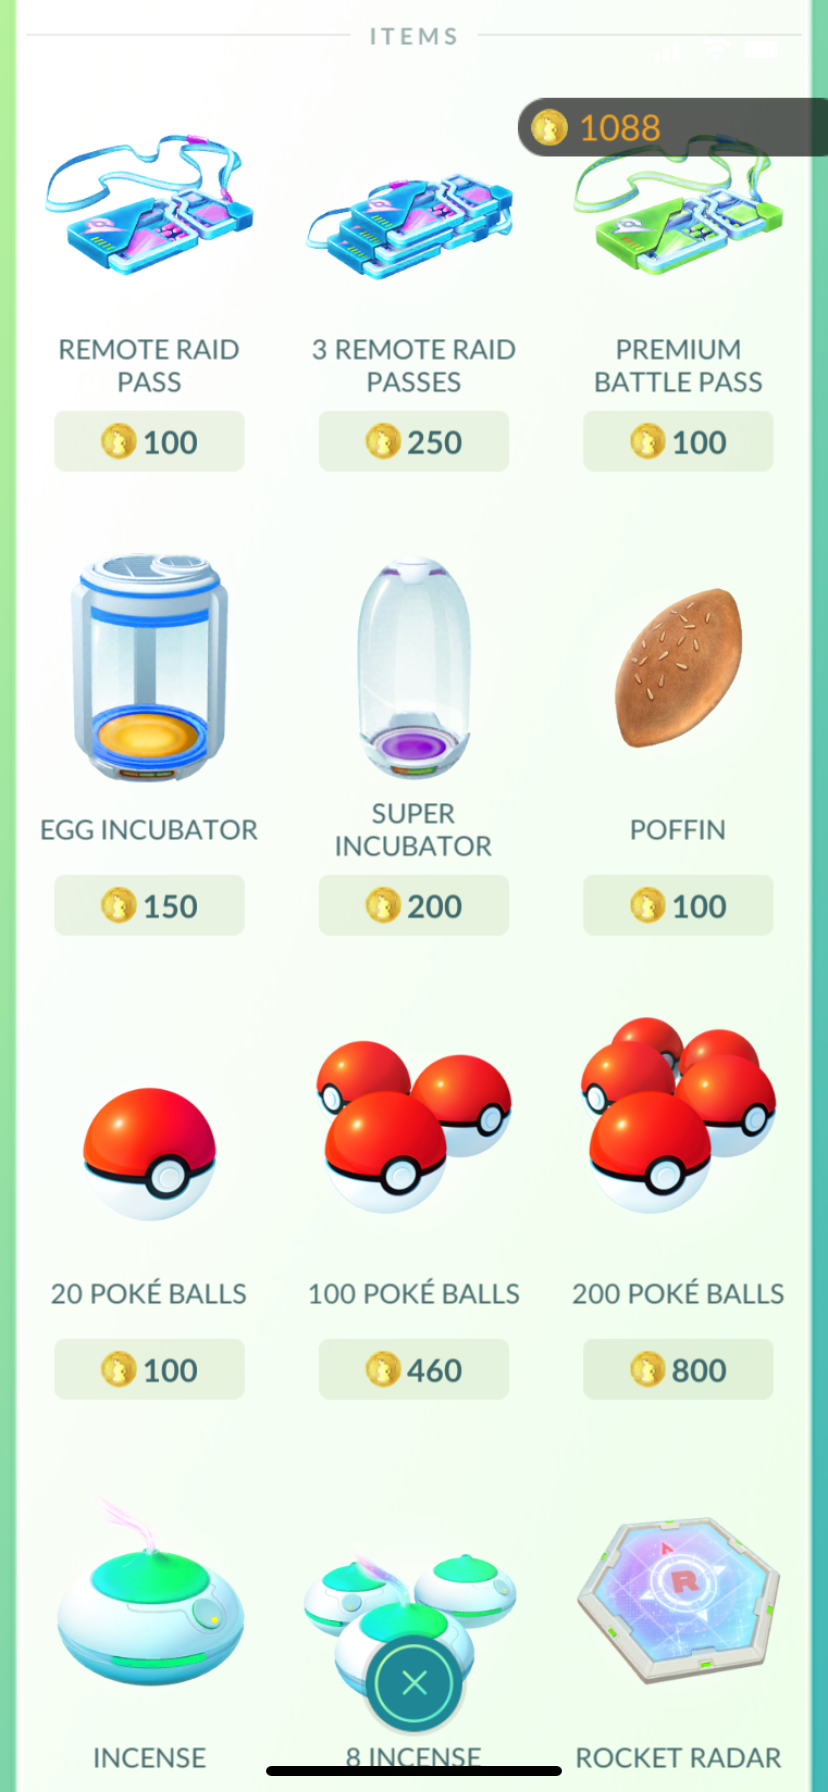 Image for Pokemon Go: how to get coins and earn free Pokecoins